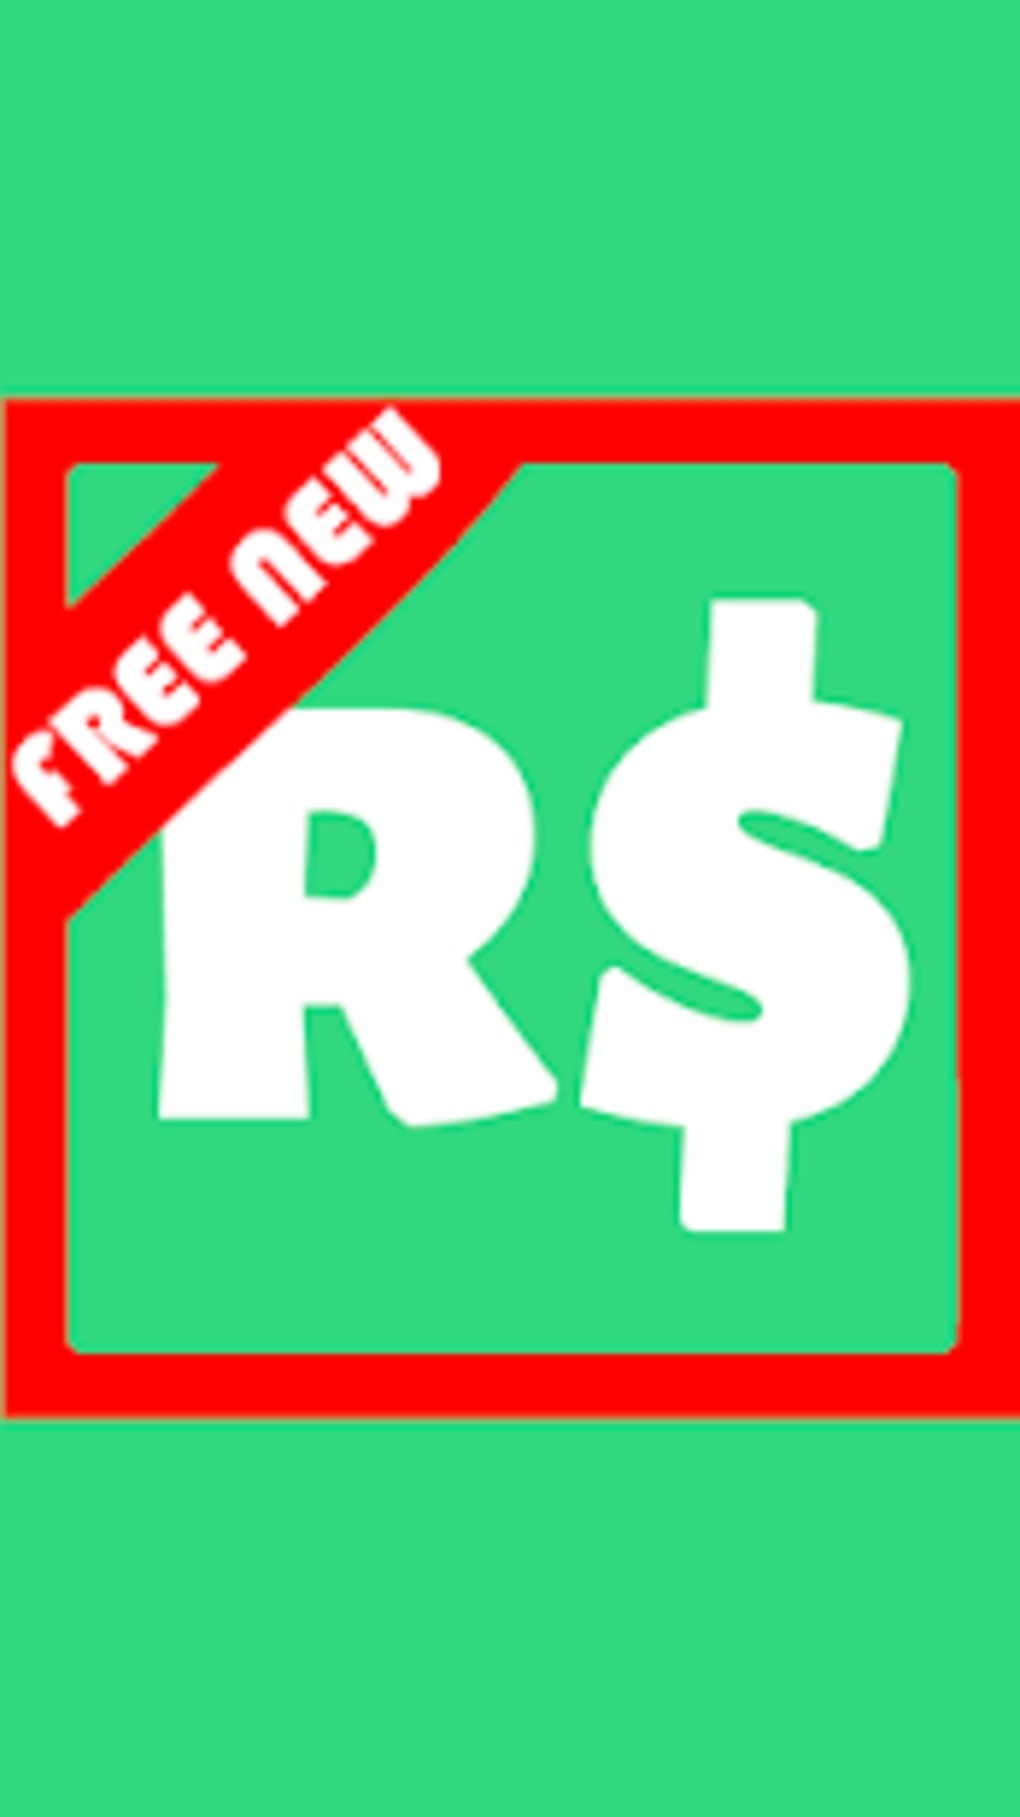 How To Have Robux For Free